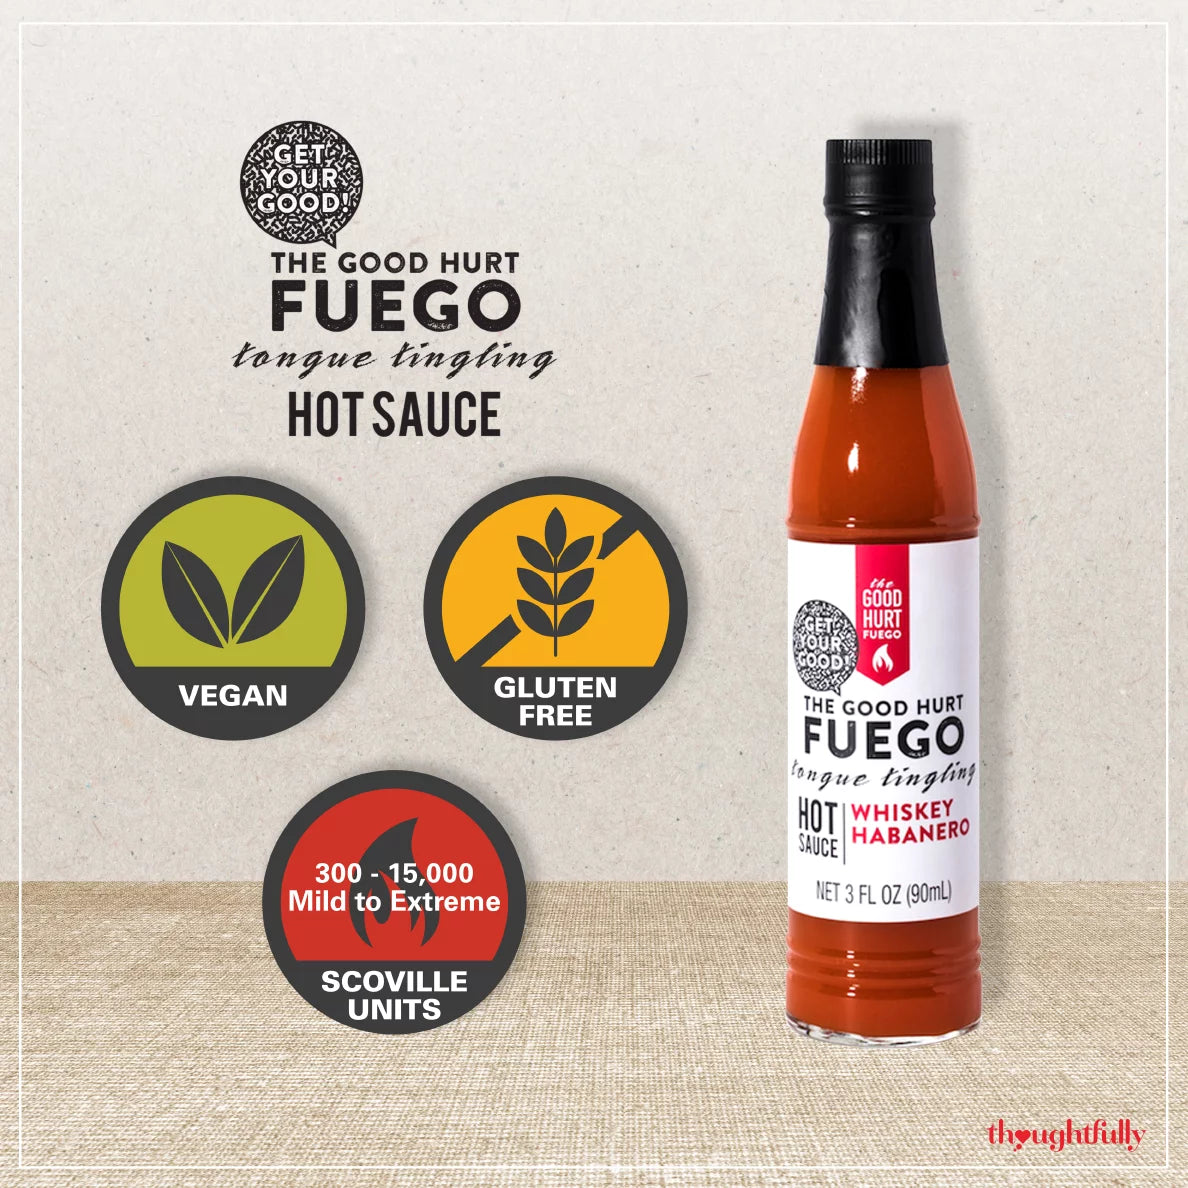 The Good Hurt Fuego: a Hot Sauce Gift Set for Hot Sauce Lover’S, Set of 7